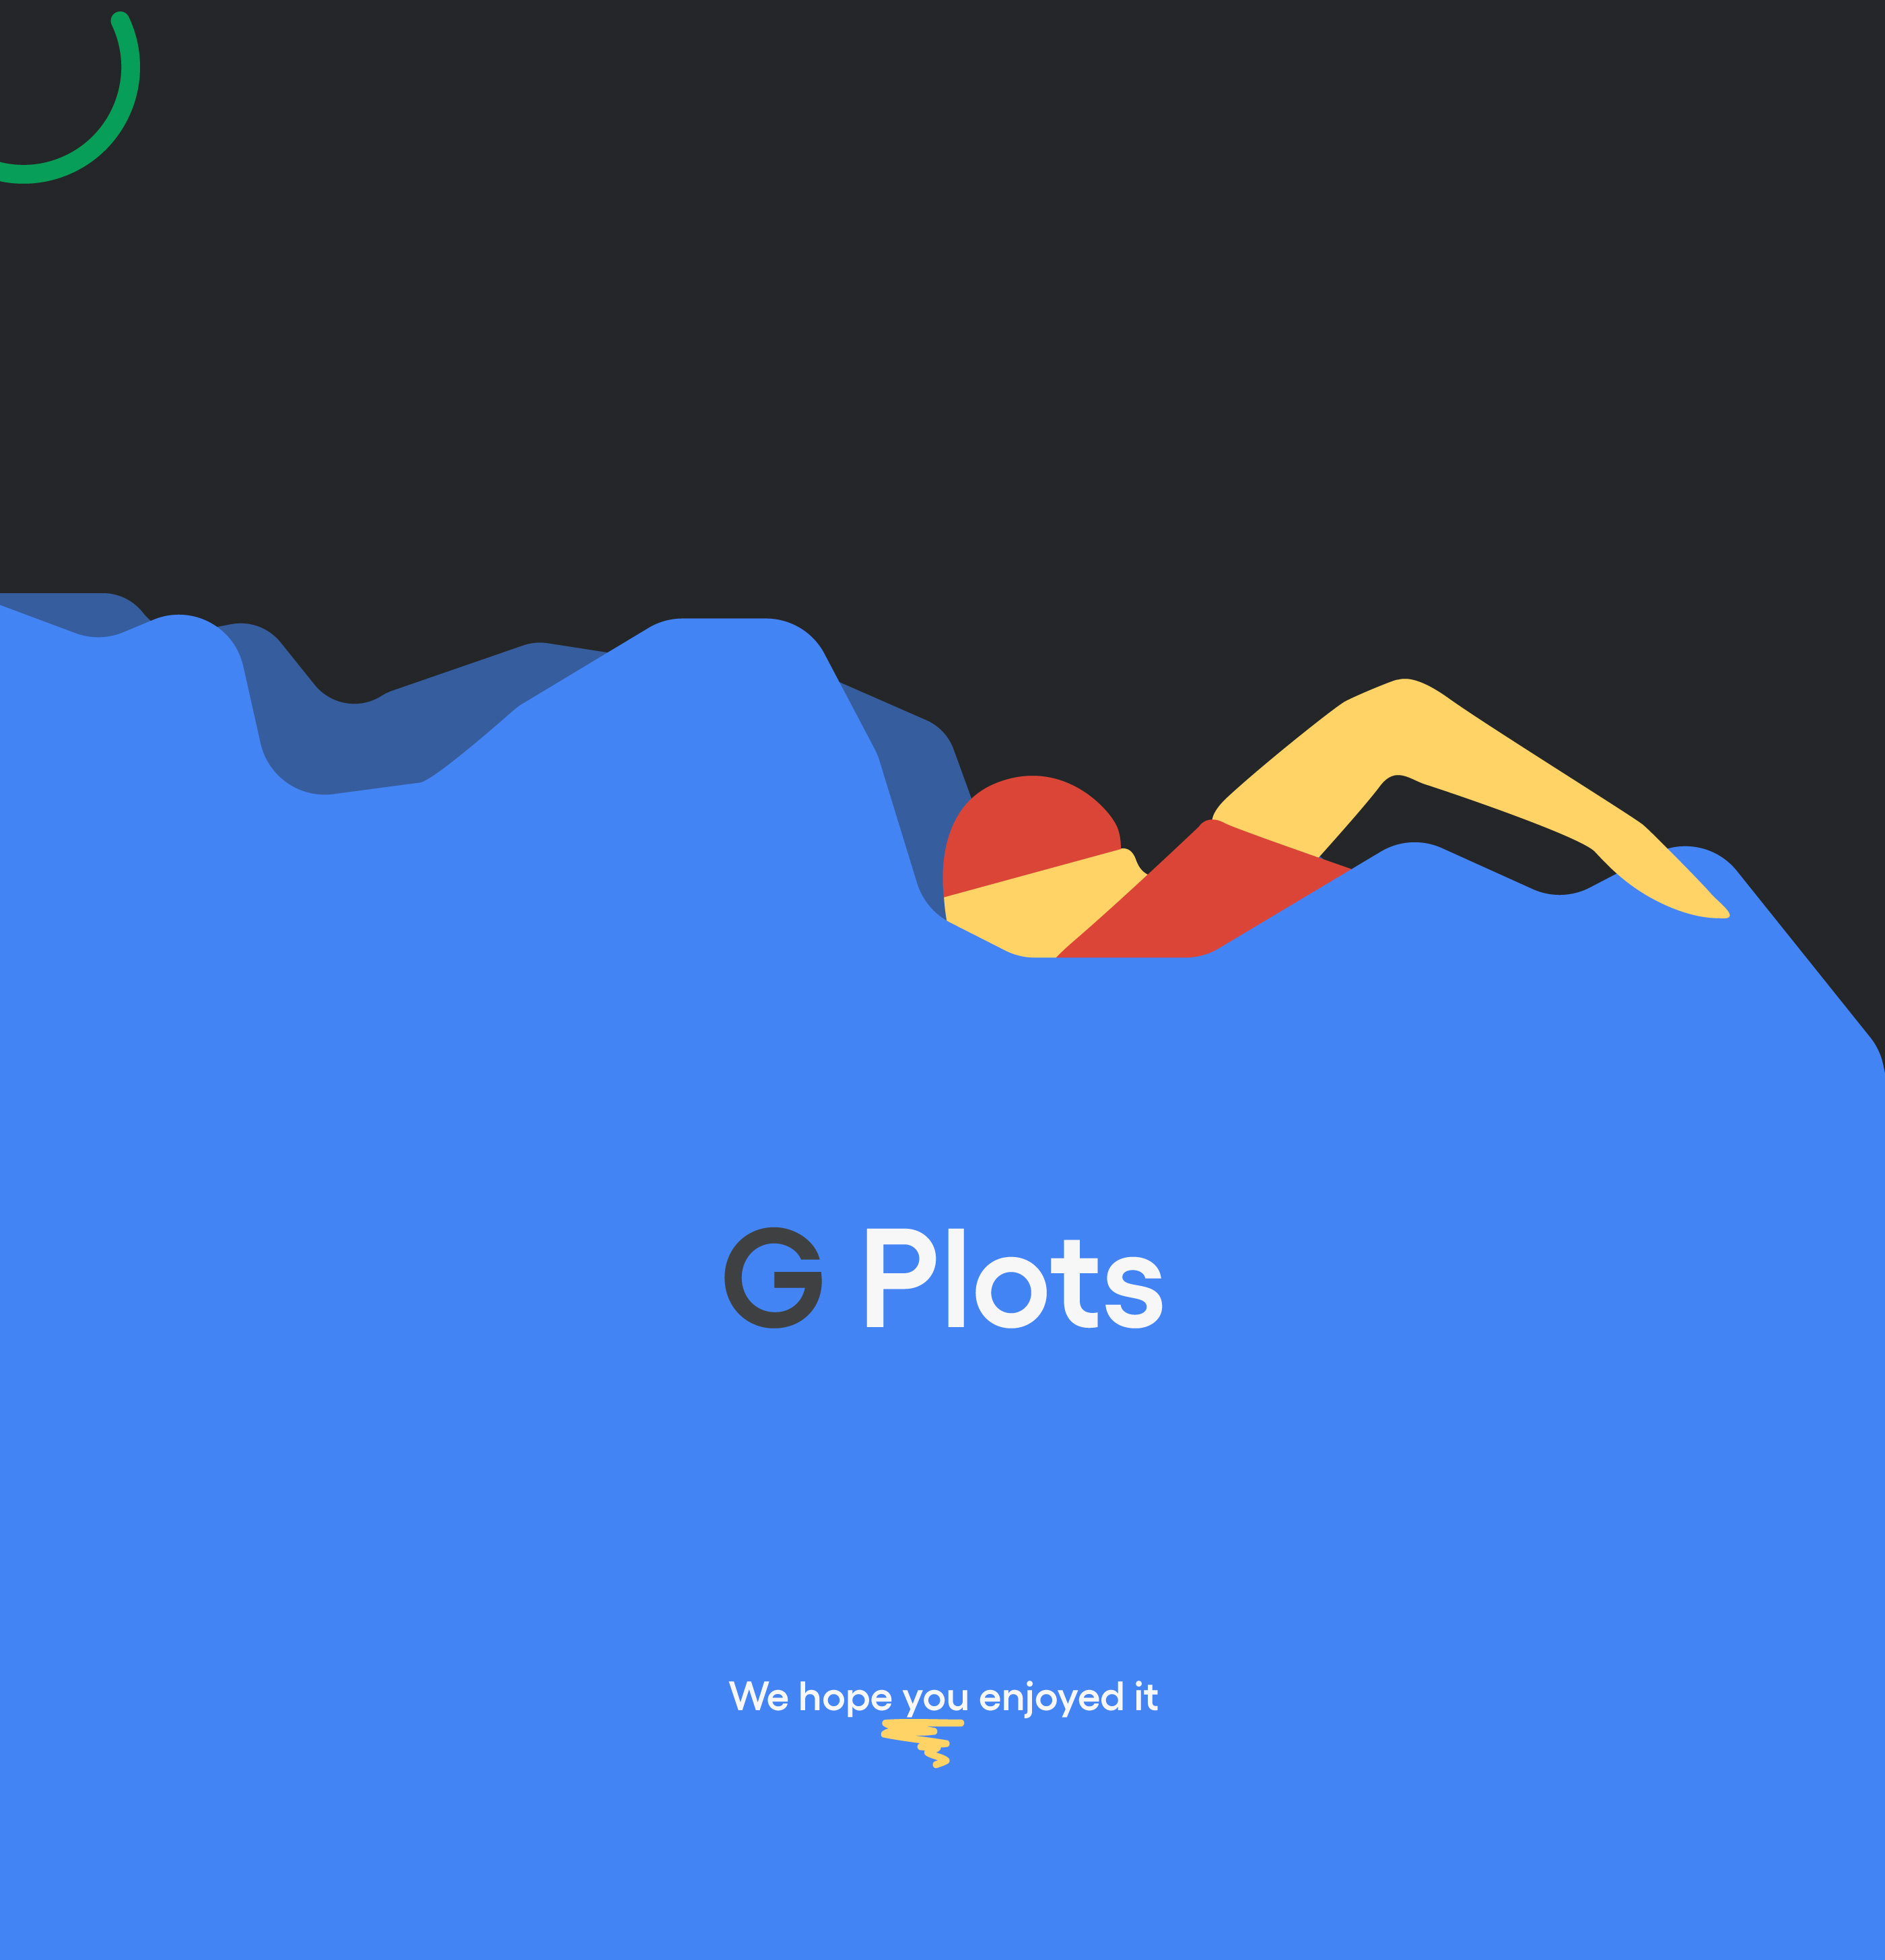 G Plots is a result of taking the system I am working on and transforming it into an imaginary product of Google